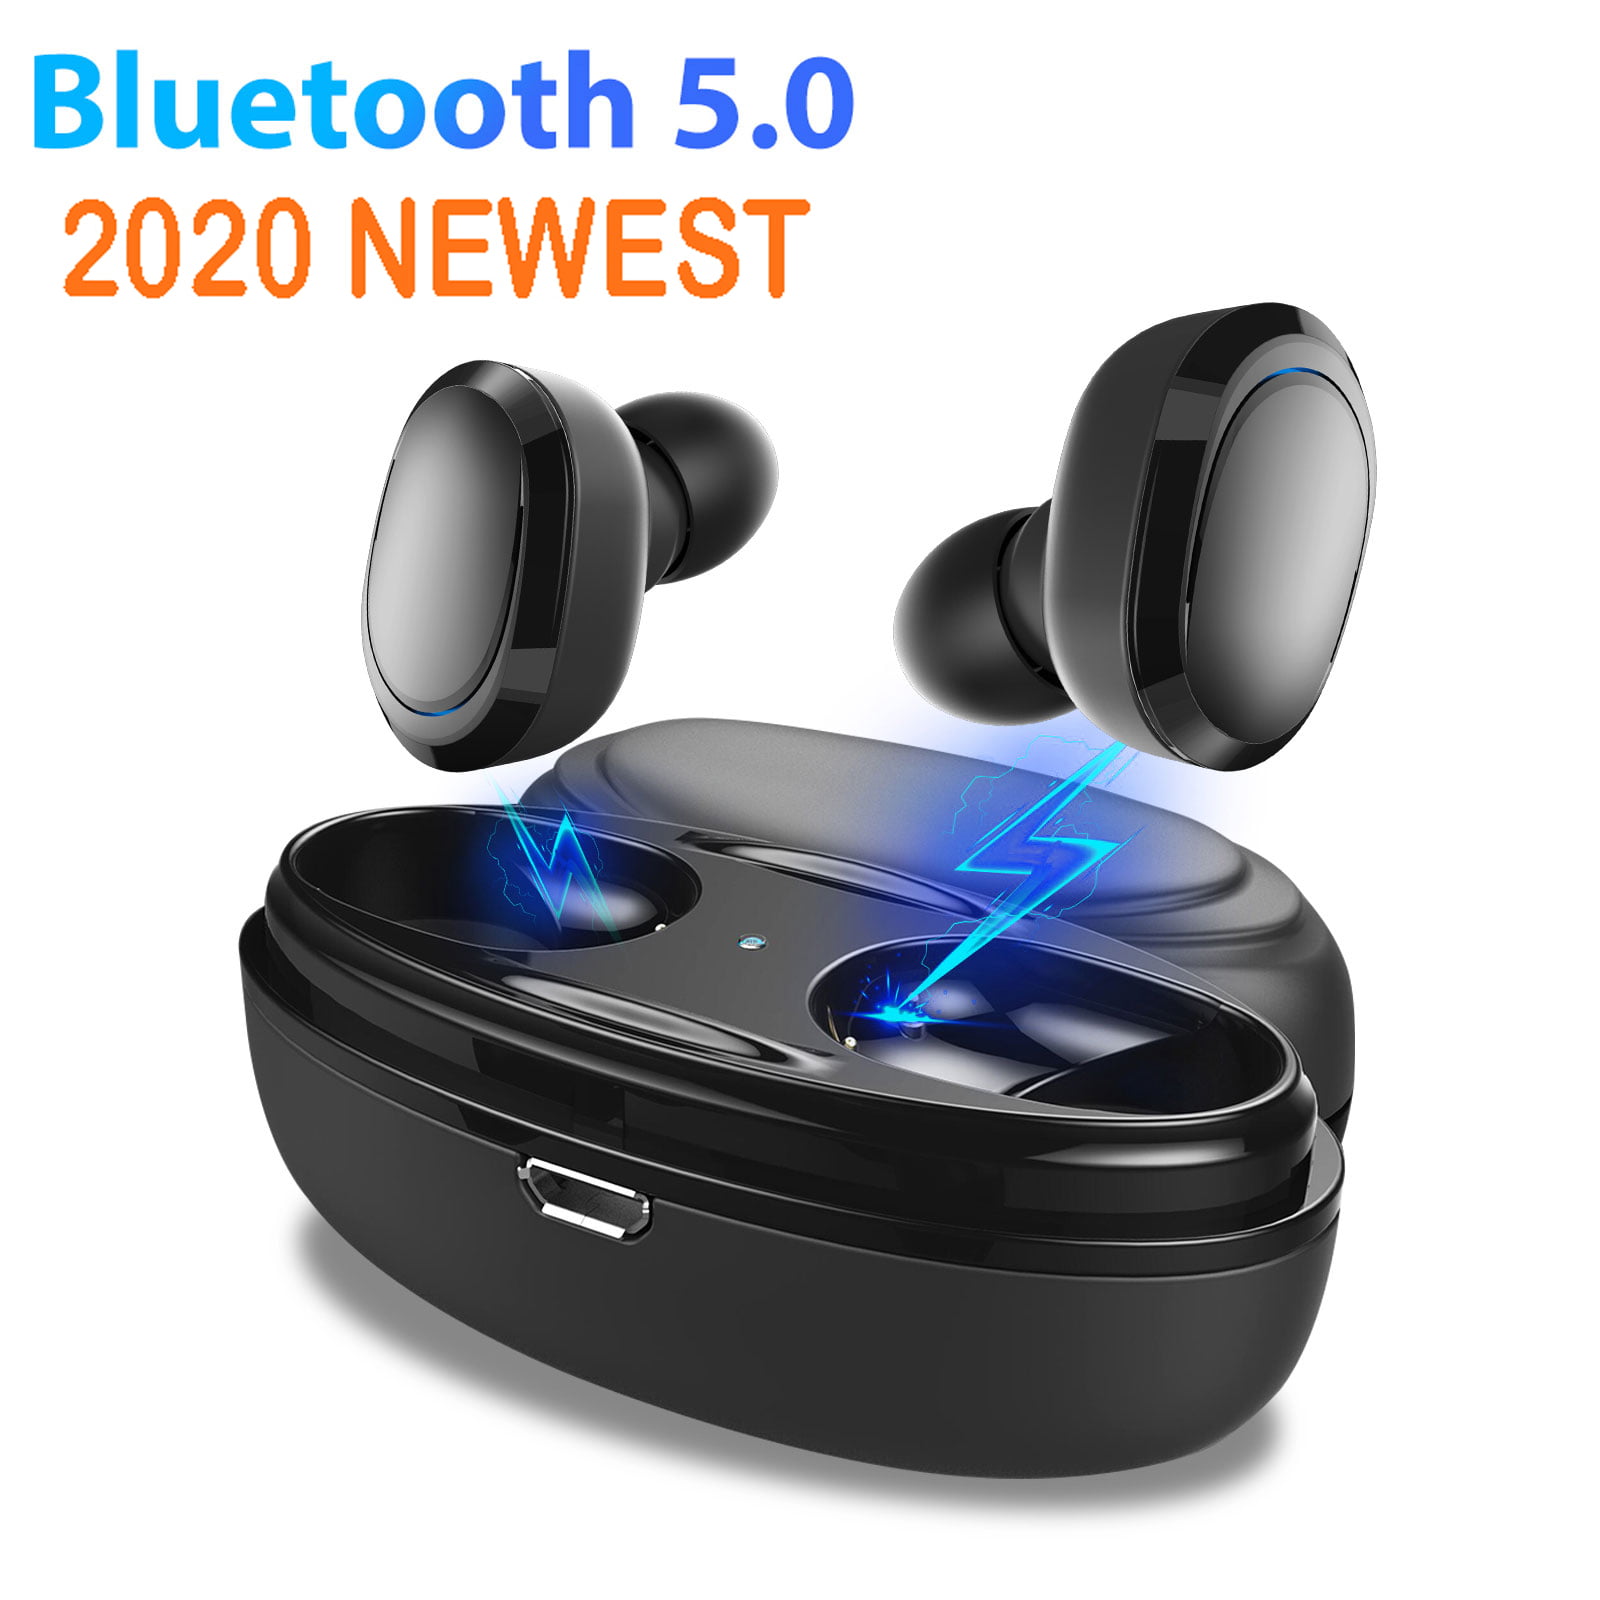 Mini Wireless Earbuds 1 Set Bluetooth Earphone Smallest Wireless Invisible Headset Headphone With Mic Hands Free Calling For Iphone Samsung And Android Smart Phones Walmart Com Walmart Com